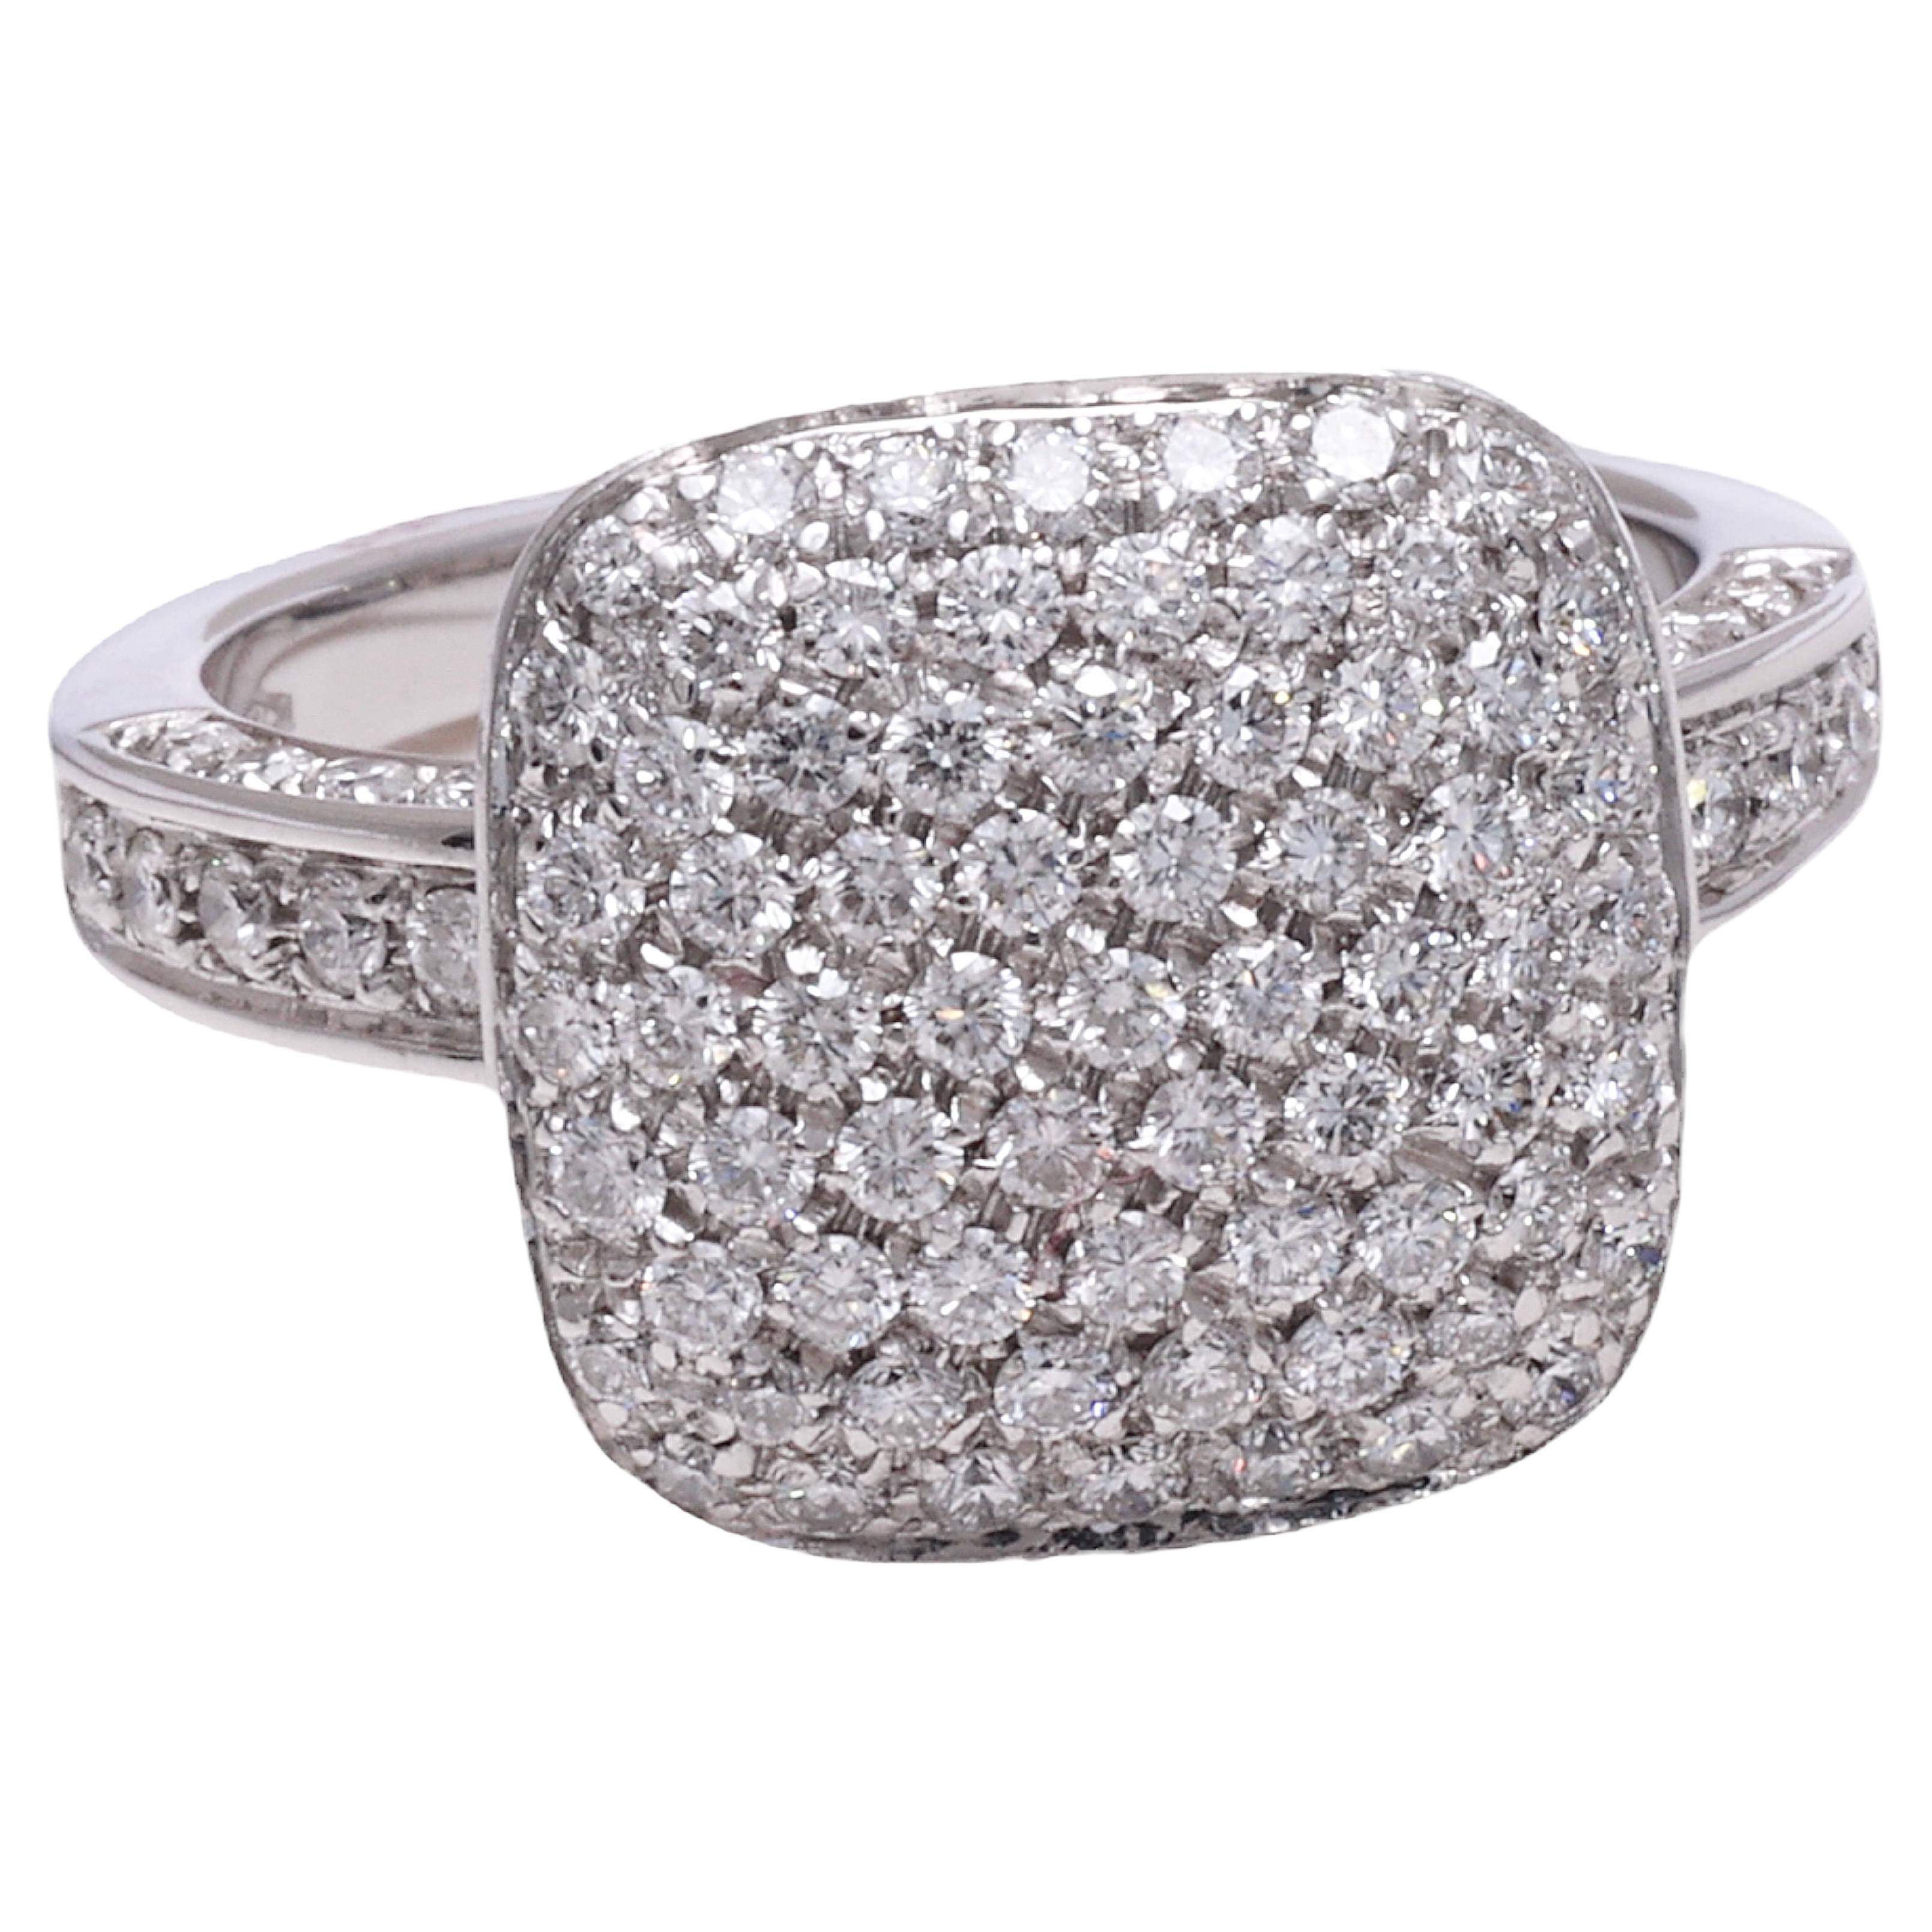 Gorgeous Square 18 kt. White Gold Ring Set with 1.30 Ct. Diamonds

Diamonds: brilliant cut diamonds together 1.30 ct.

Material: 18 kt. white gold

Ring size: 53.1 EU / 6.5 US ( can be resized for free)

Total weight: 7.3 gram / 4.70 dwt / 0.255 oz
